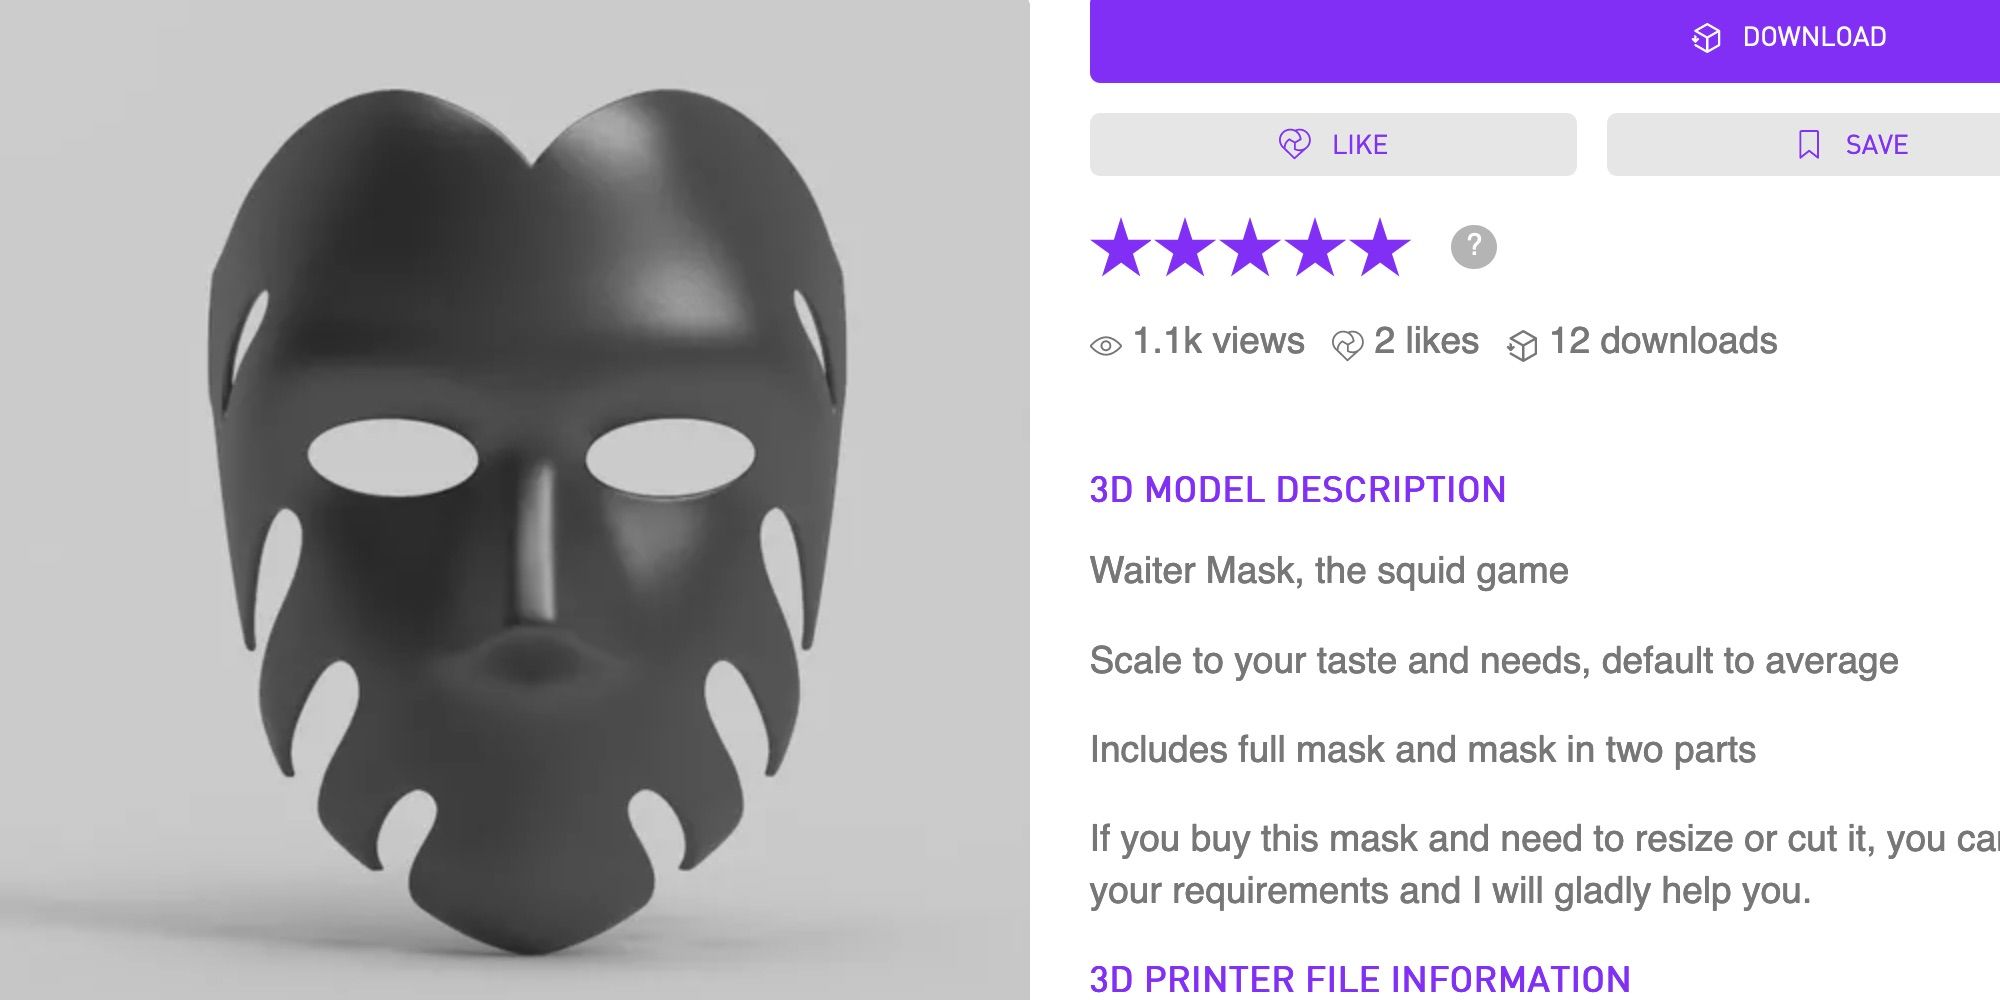 A 3D model of a black mask in the shape of a face with cutouts along the edge, next to information about the designer